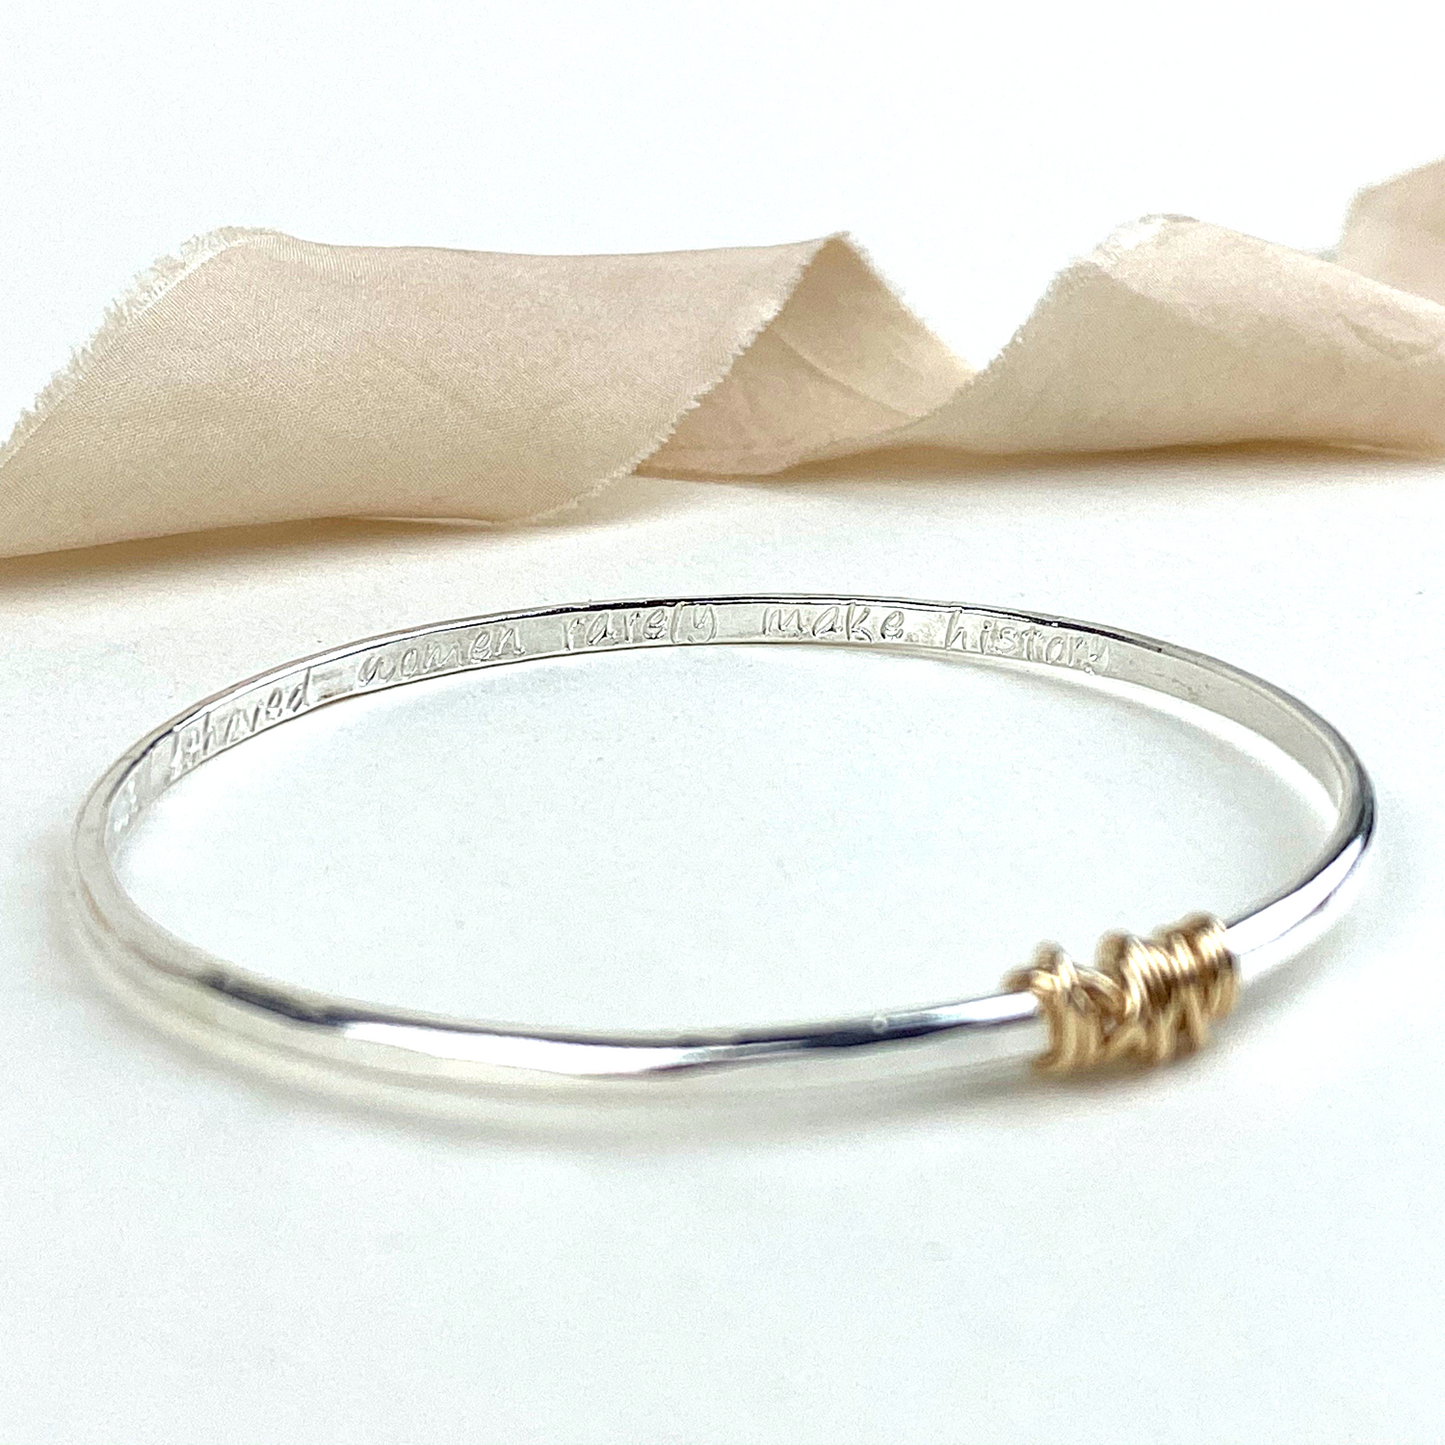 The Tanner Personalised Bangle - sterling silver with 12ct gold twist personalised textured bracelet - hand stamped secret message jewellery